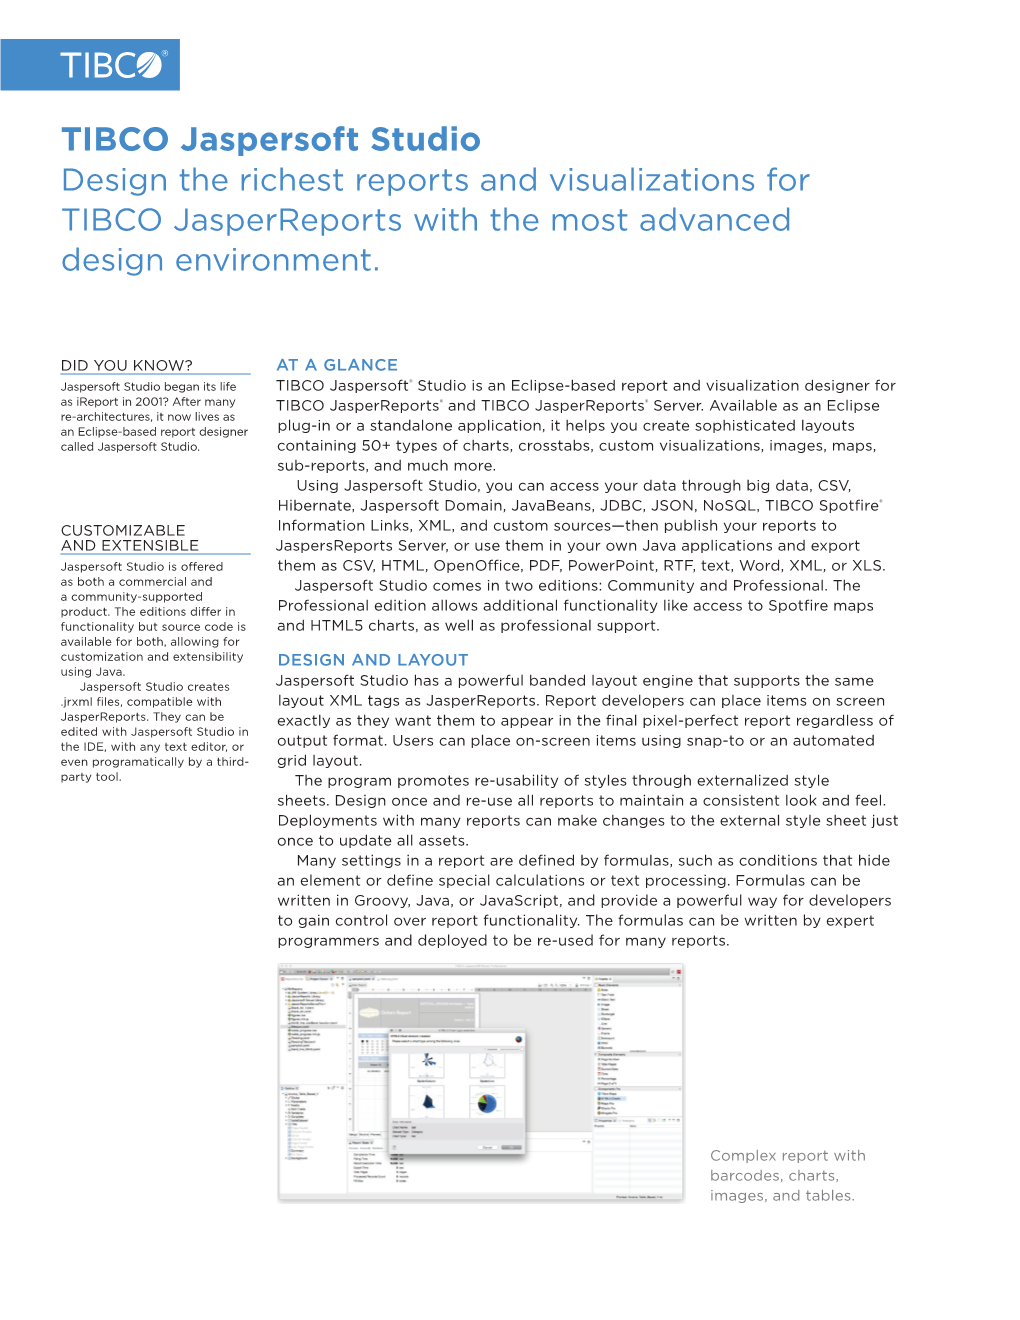 TIBCO Jaspersoft Studio Design the Richest Reports and Visualizations for TIBCO Jasperreports with the Most Advanced Design Environment